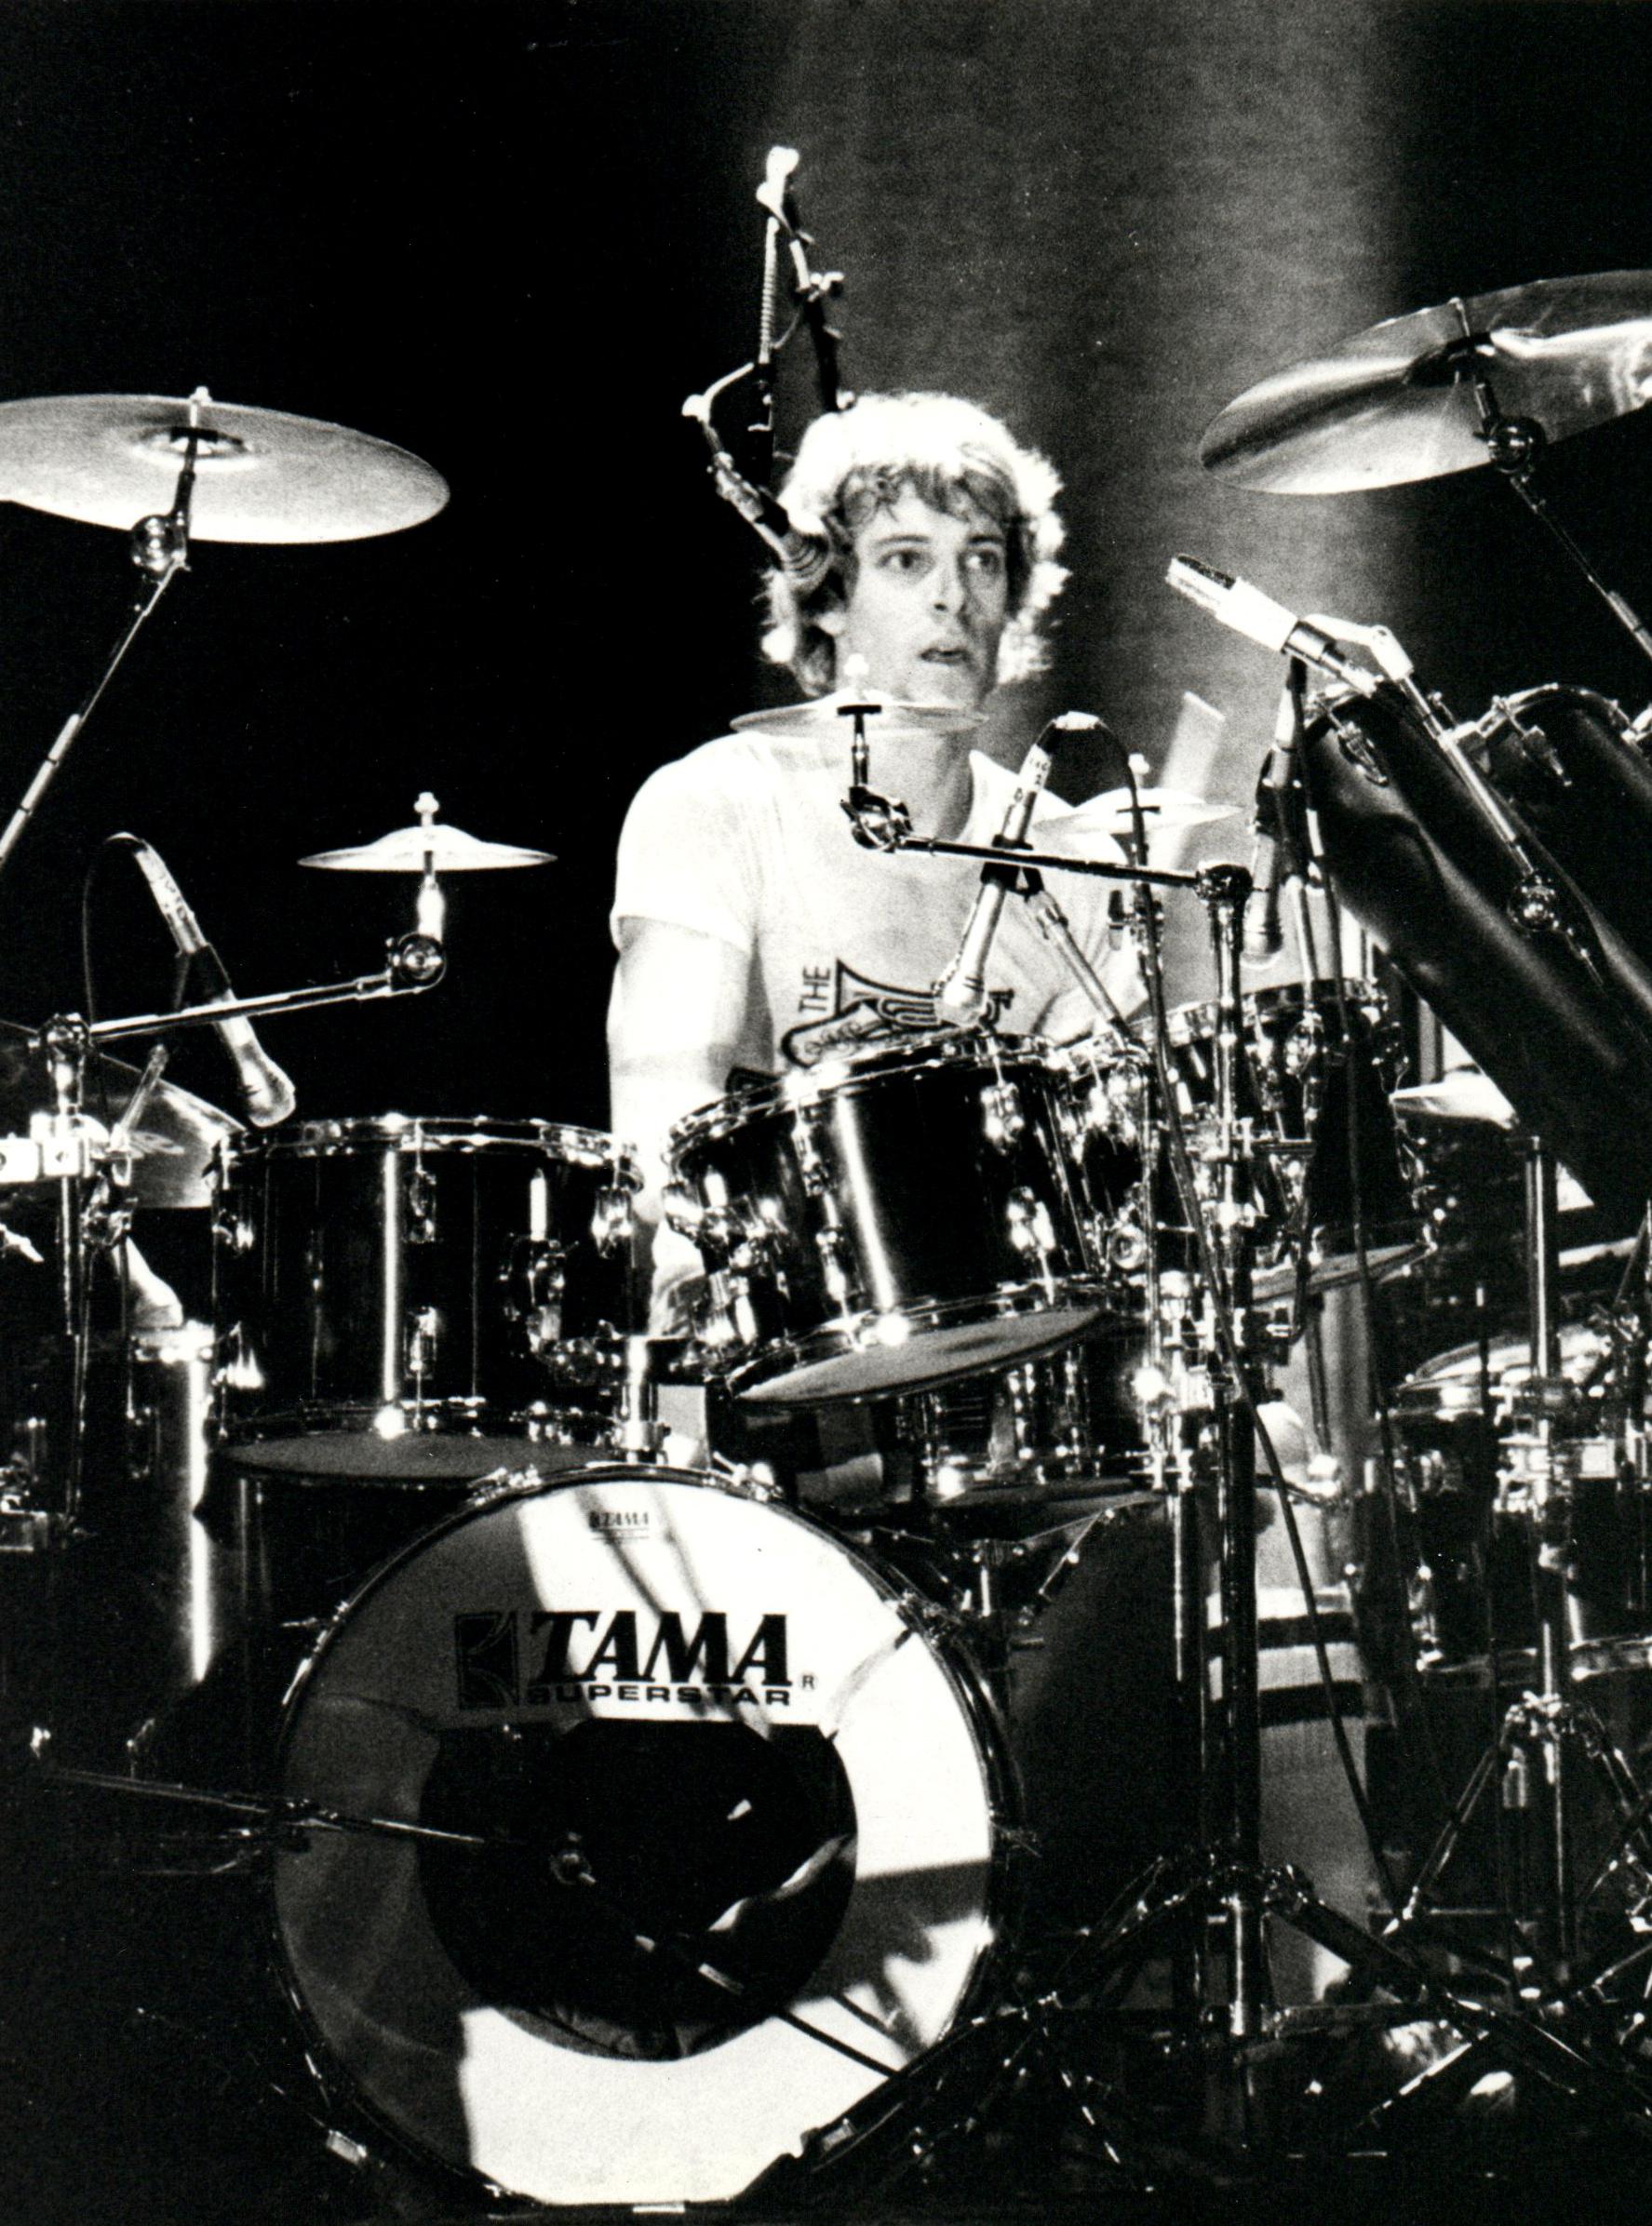 David Wainwright Black and White Photograph - Stewart Copeland of The Police in Concert Vintage Original Photograph